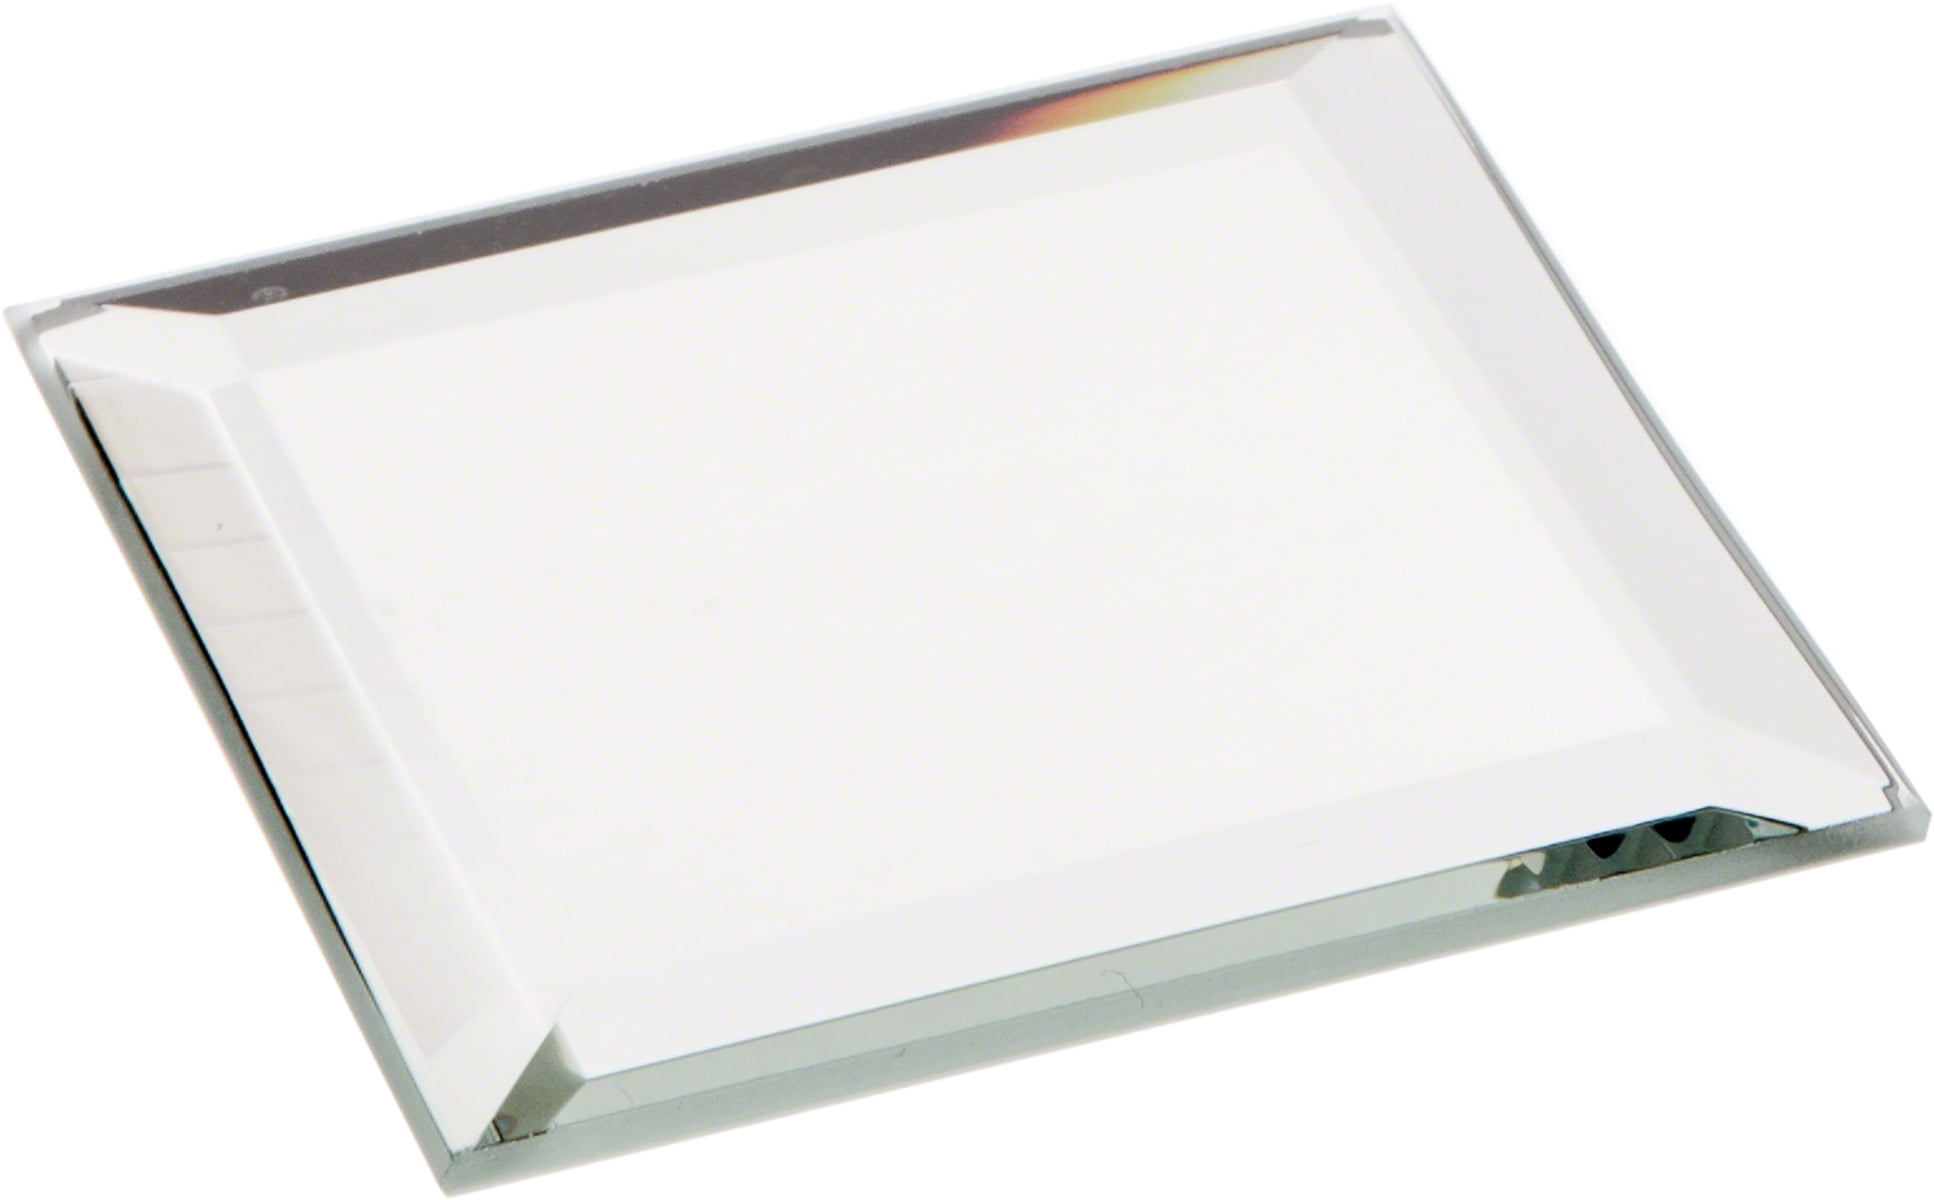 Pack of 3 Plymor Rectangle 3mm Beveled Glass Mirror 4 inch x 8 inch 